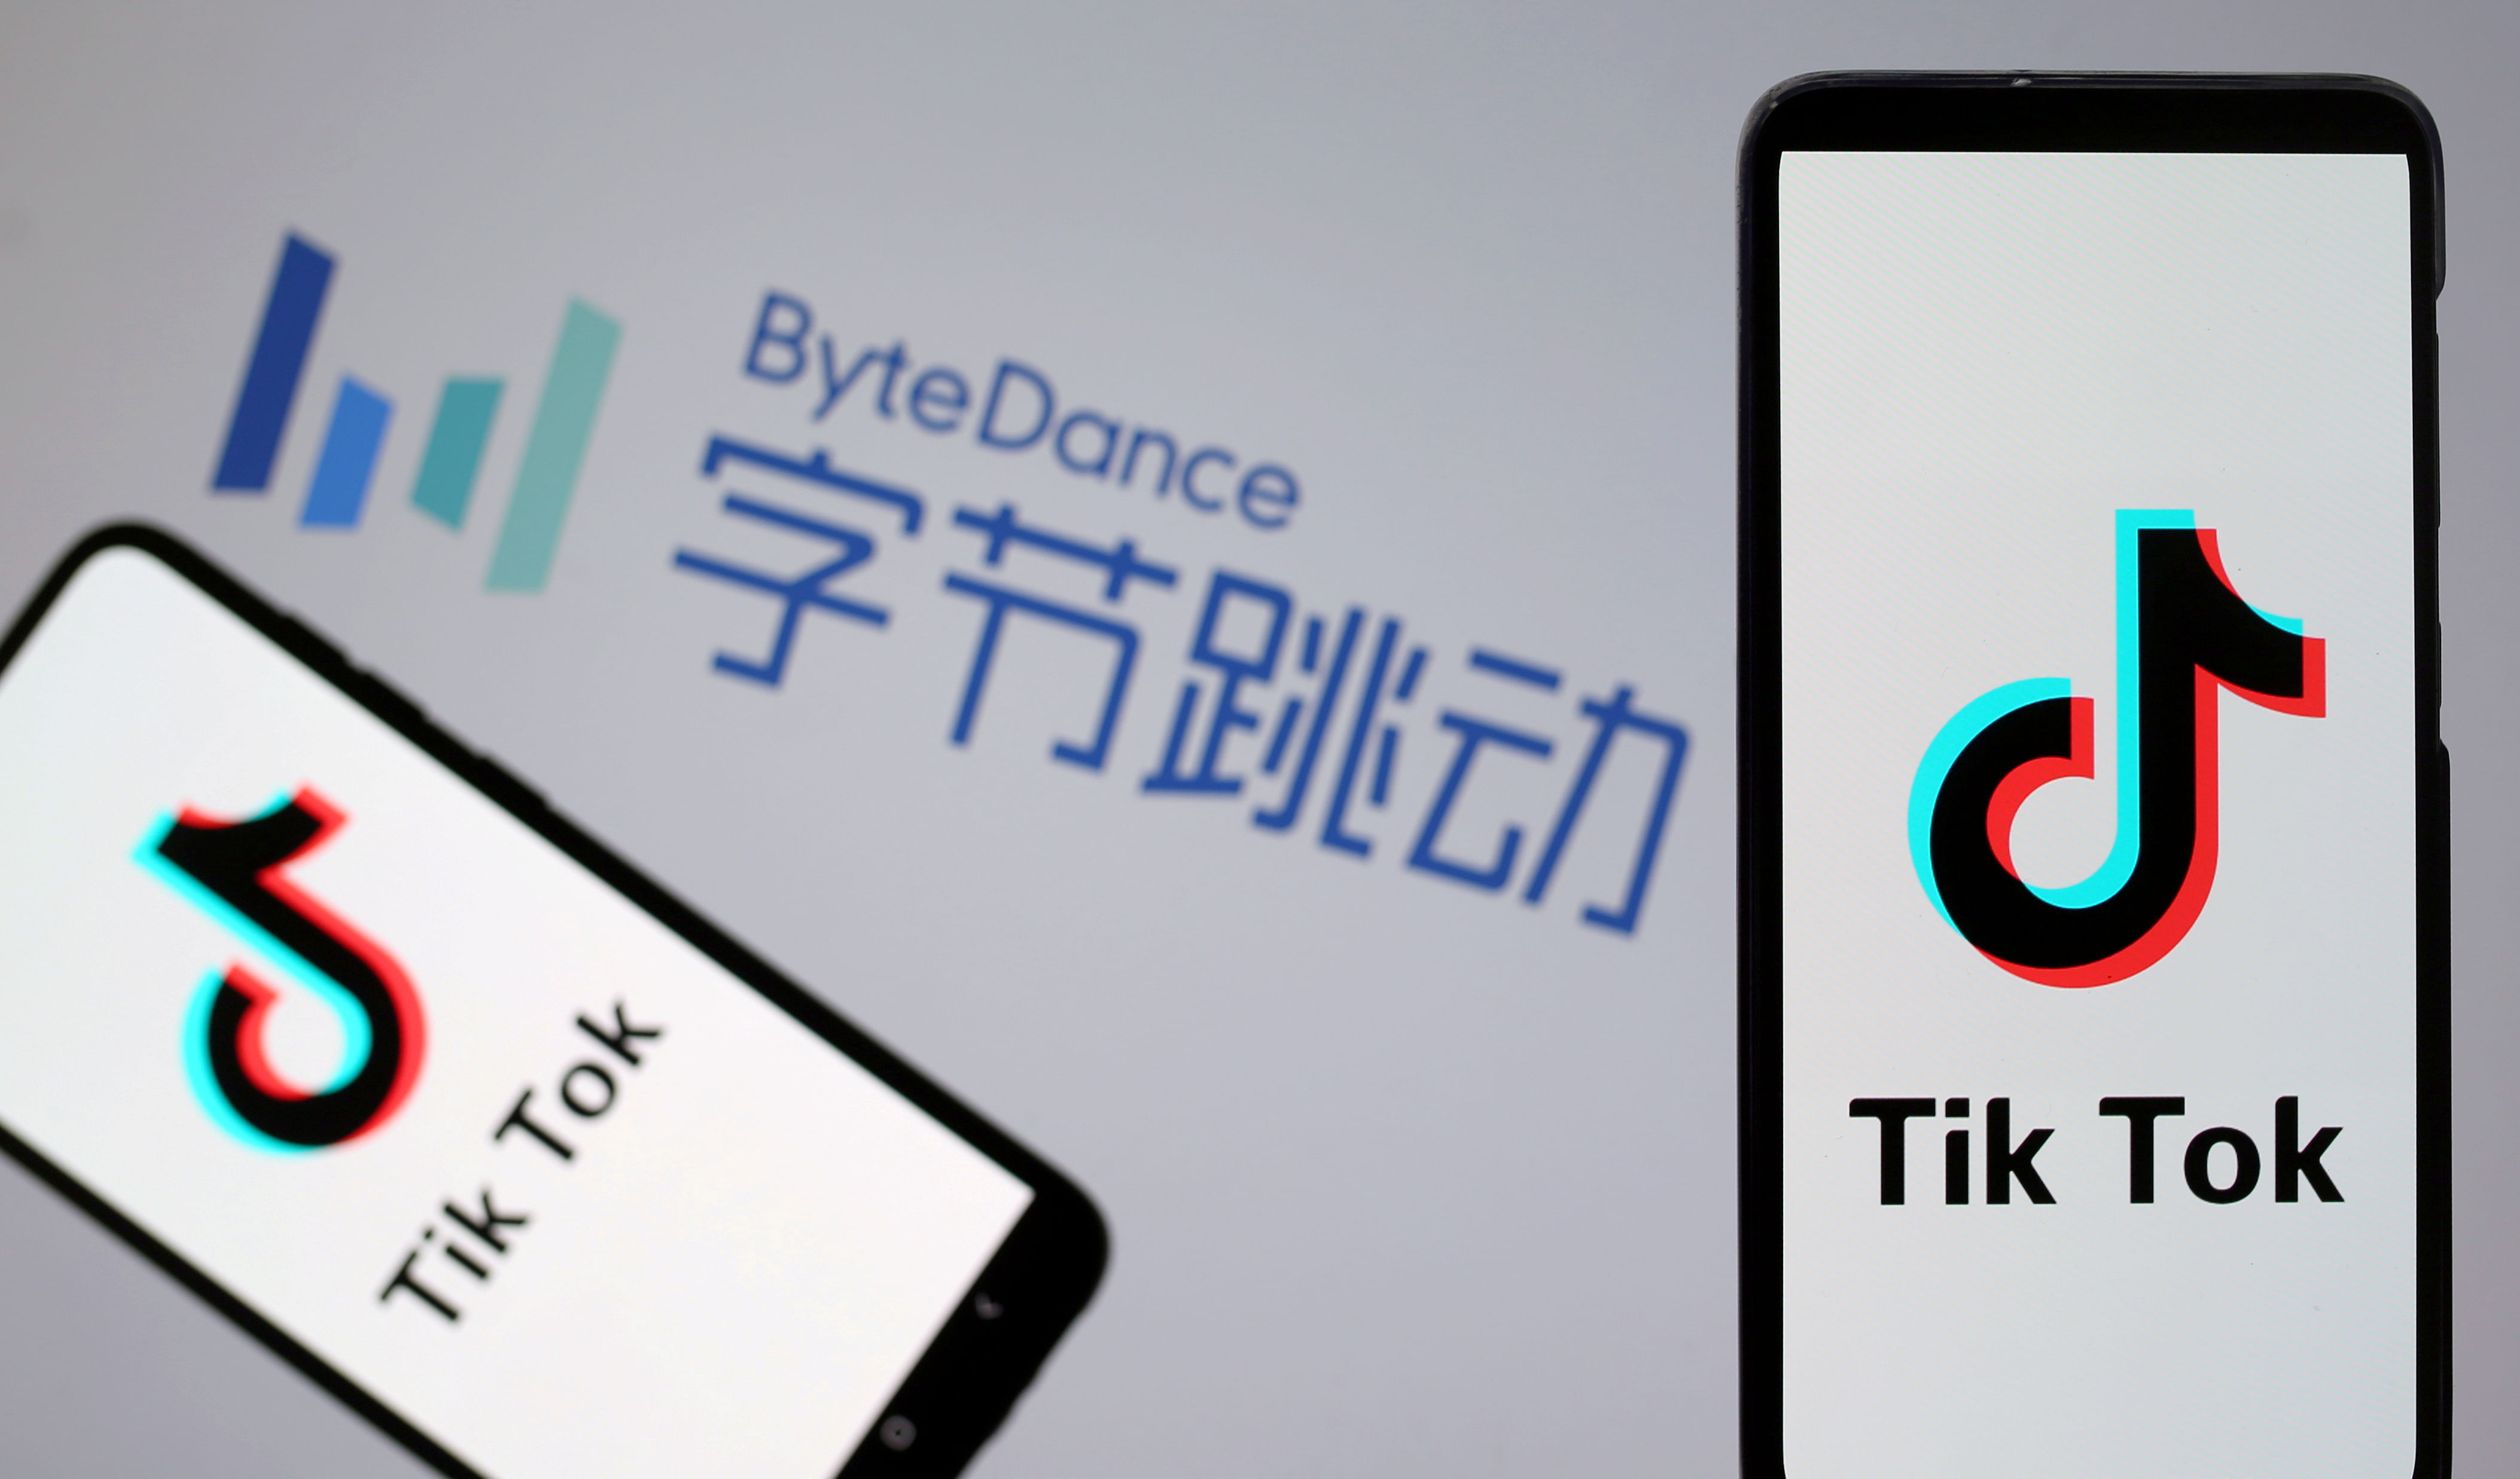 Tik Tok logos are seen on smartphones in front of a displayed ByteDance logo in this illustration. (Reuters Photo)